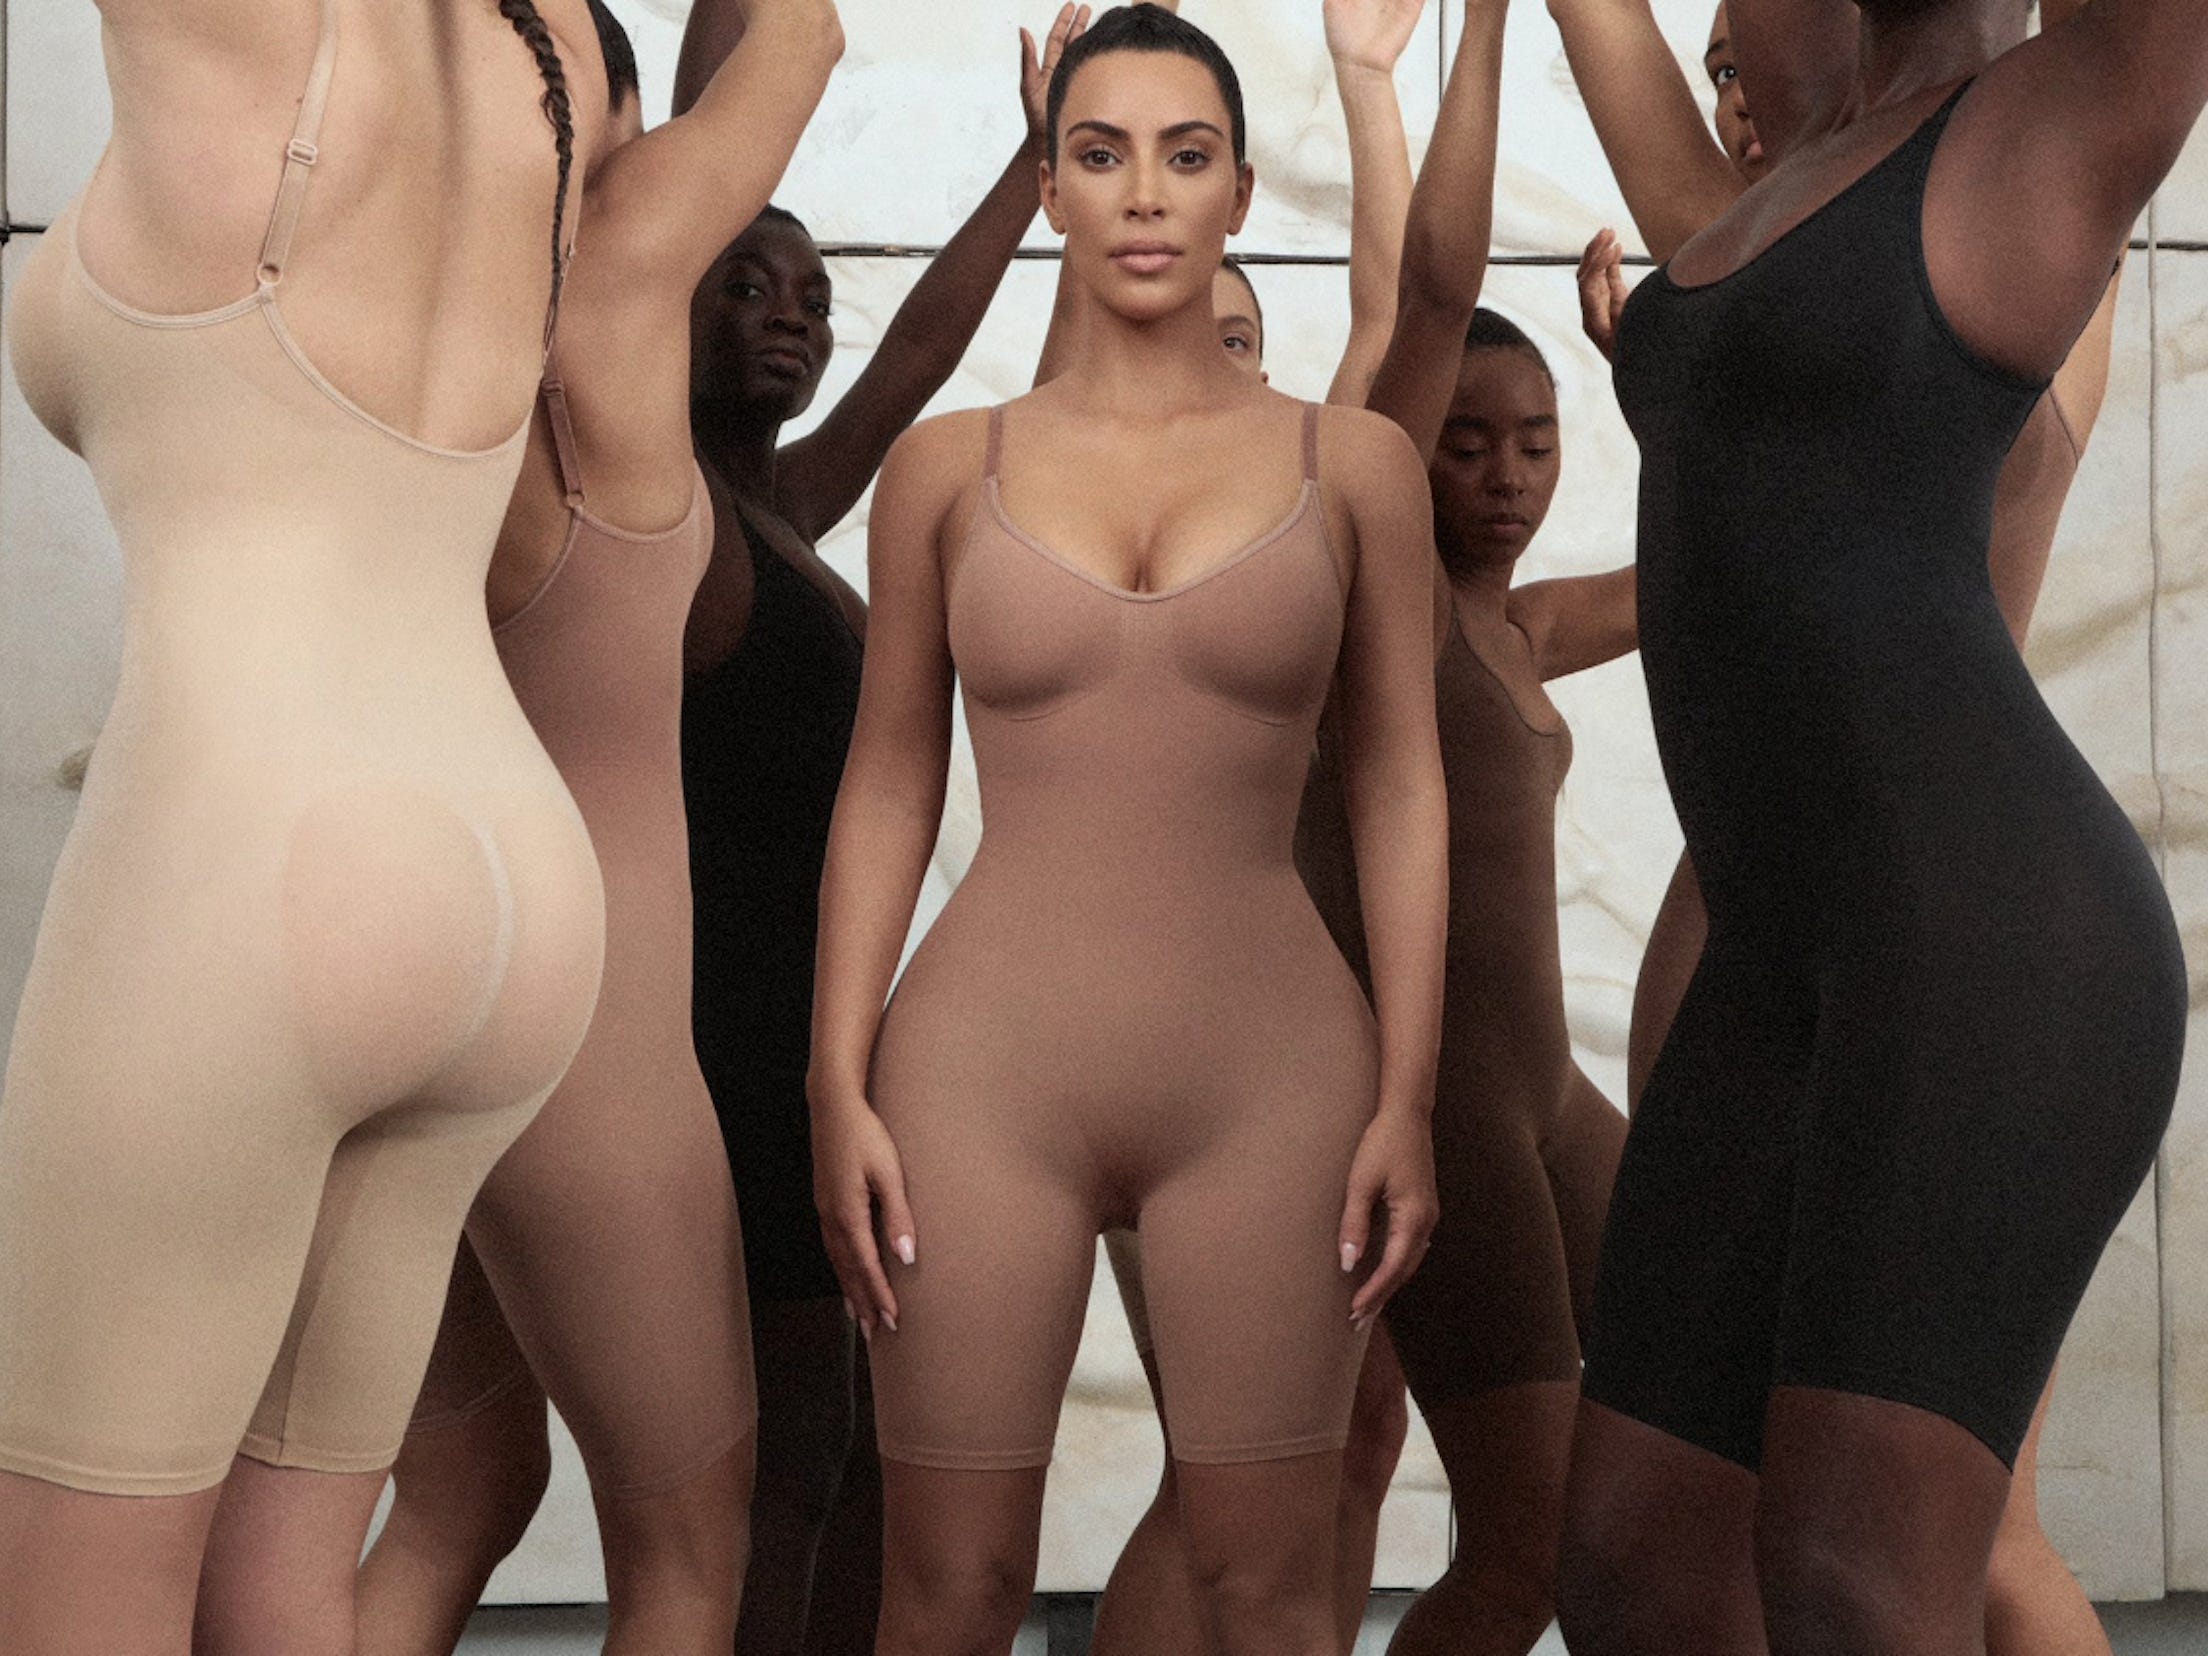 Kim Kardashian is launching a new SKIMS maternity line, and people